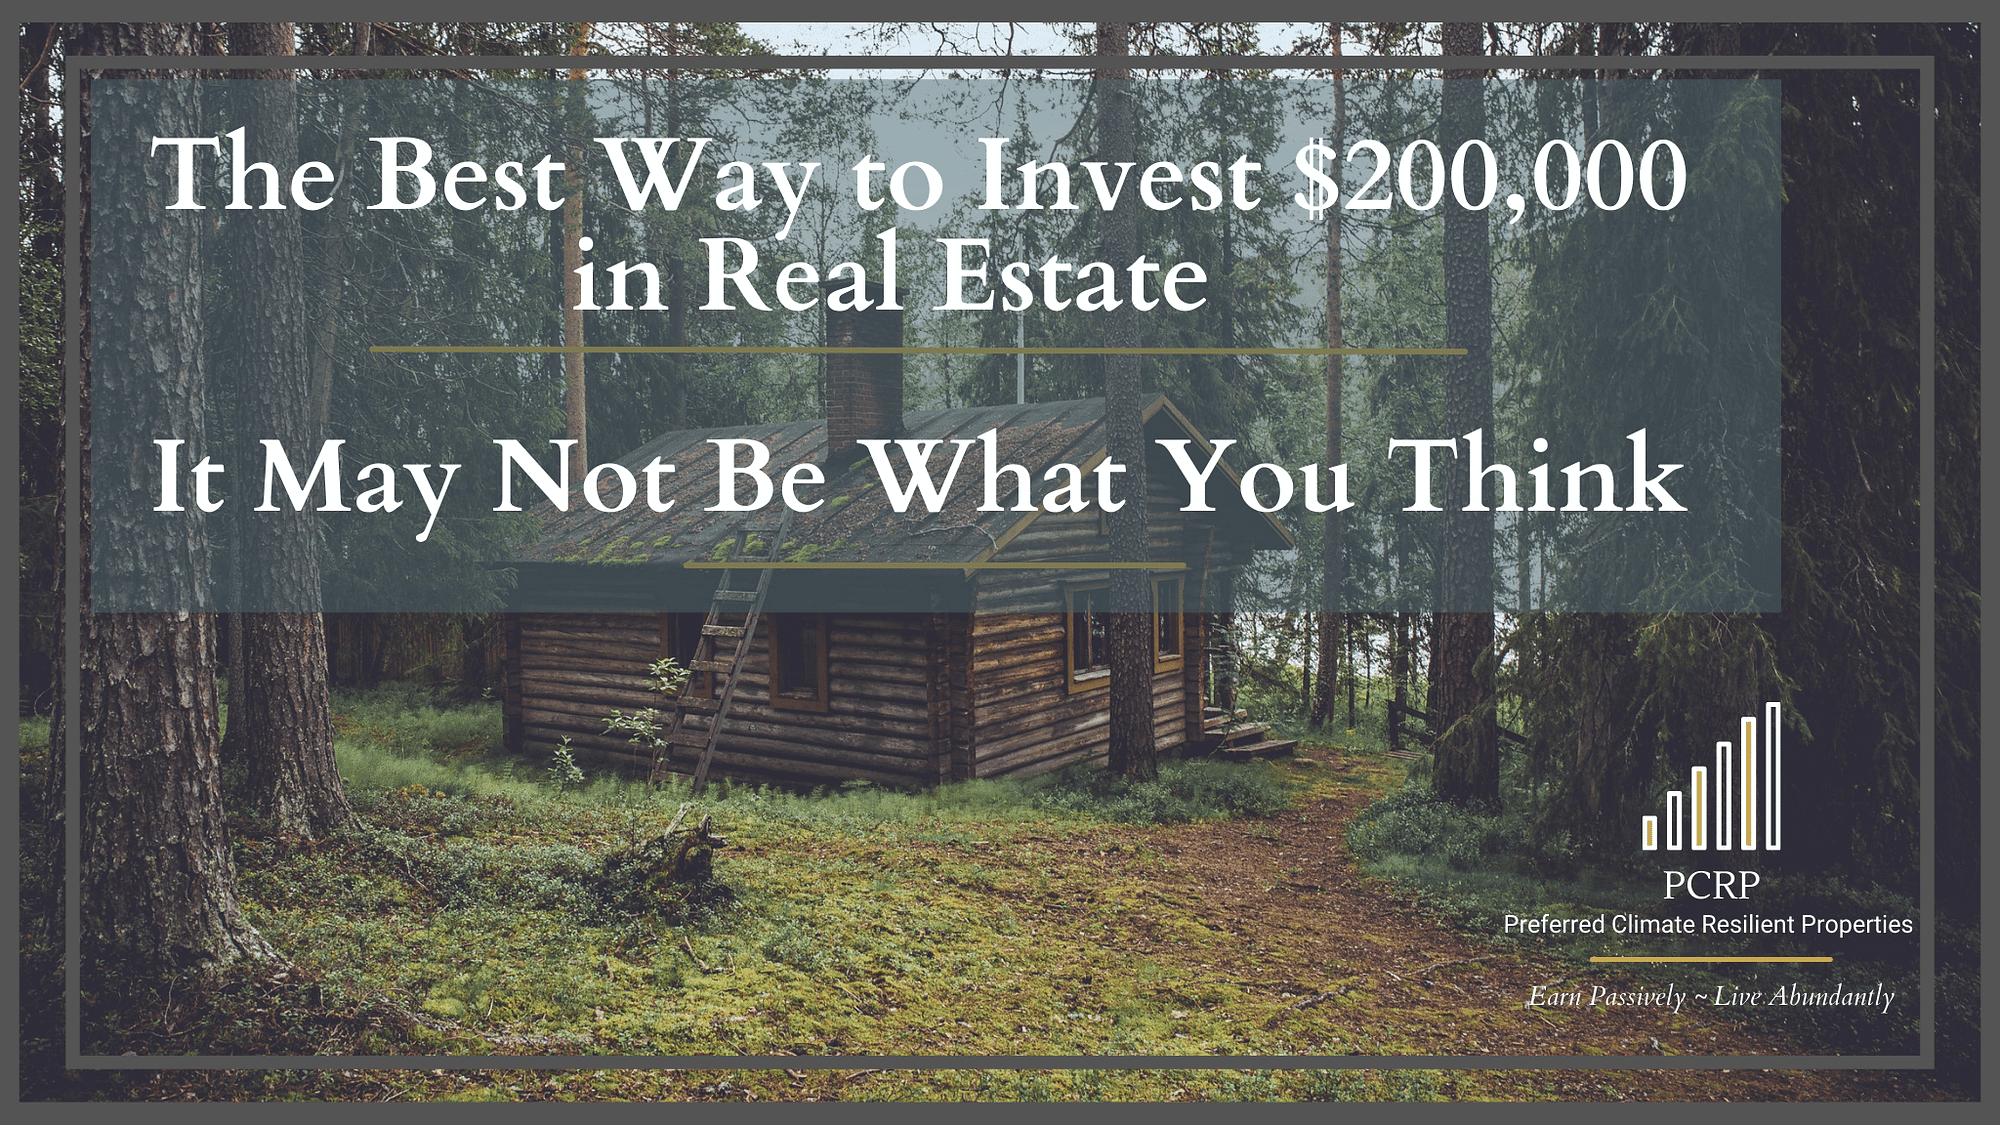 the best way to invest $200,000 and it may not be what you think